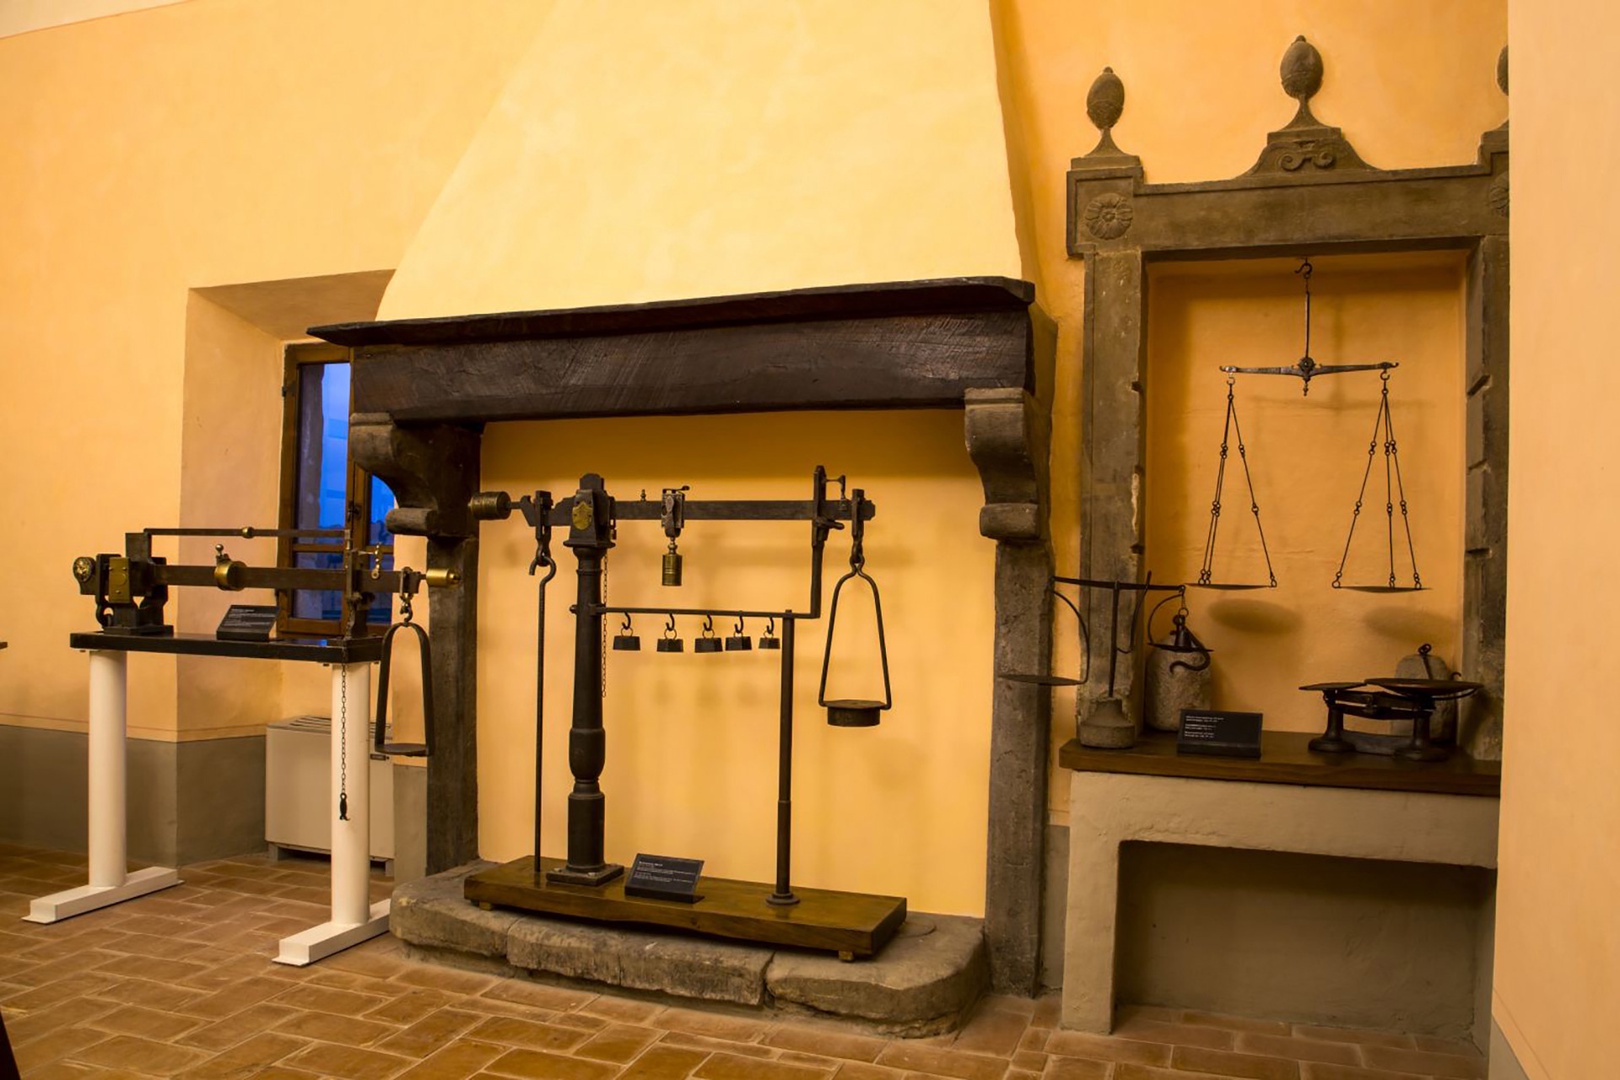 The Museum of Scales interactively shows 600 years of history of weighing machines. Good for kids